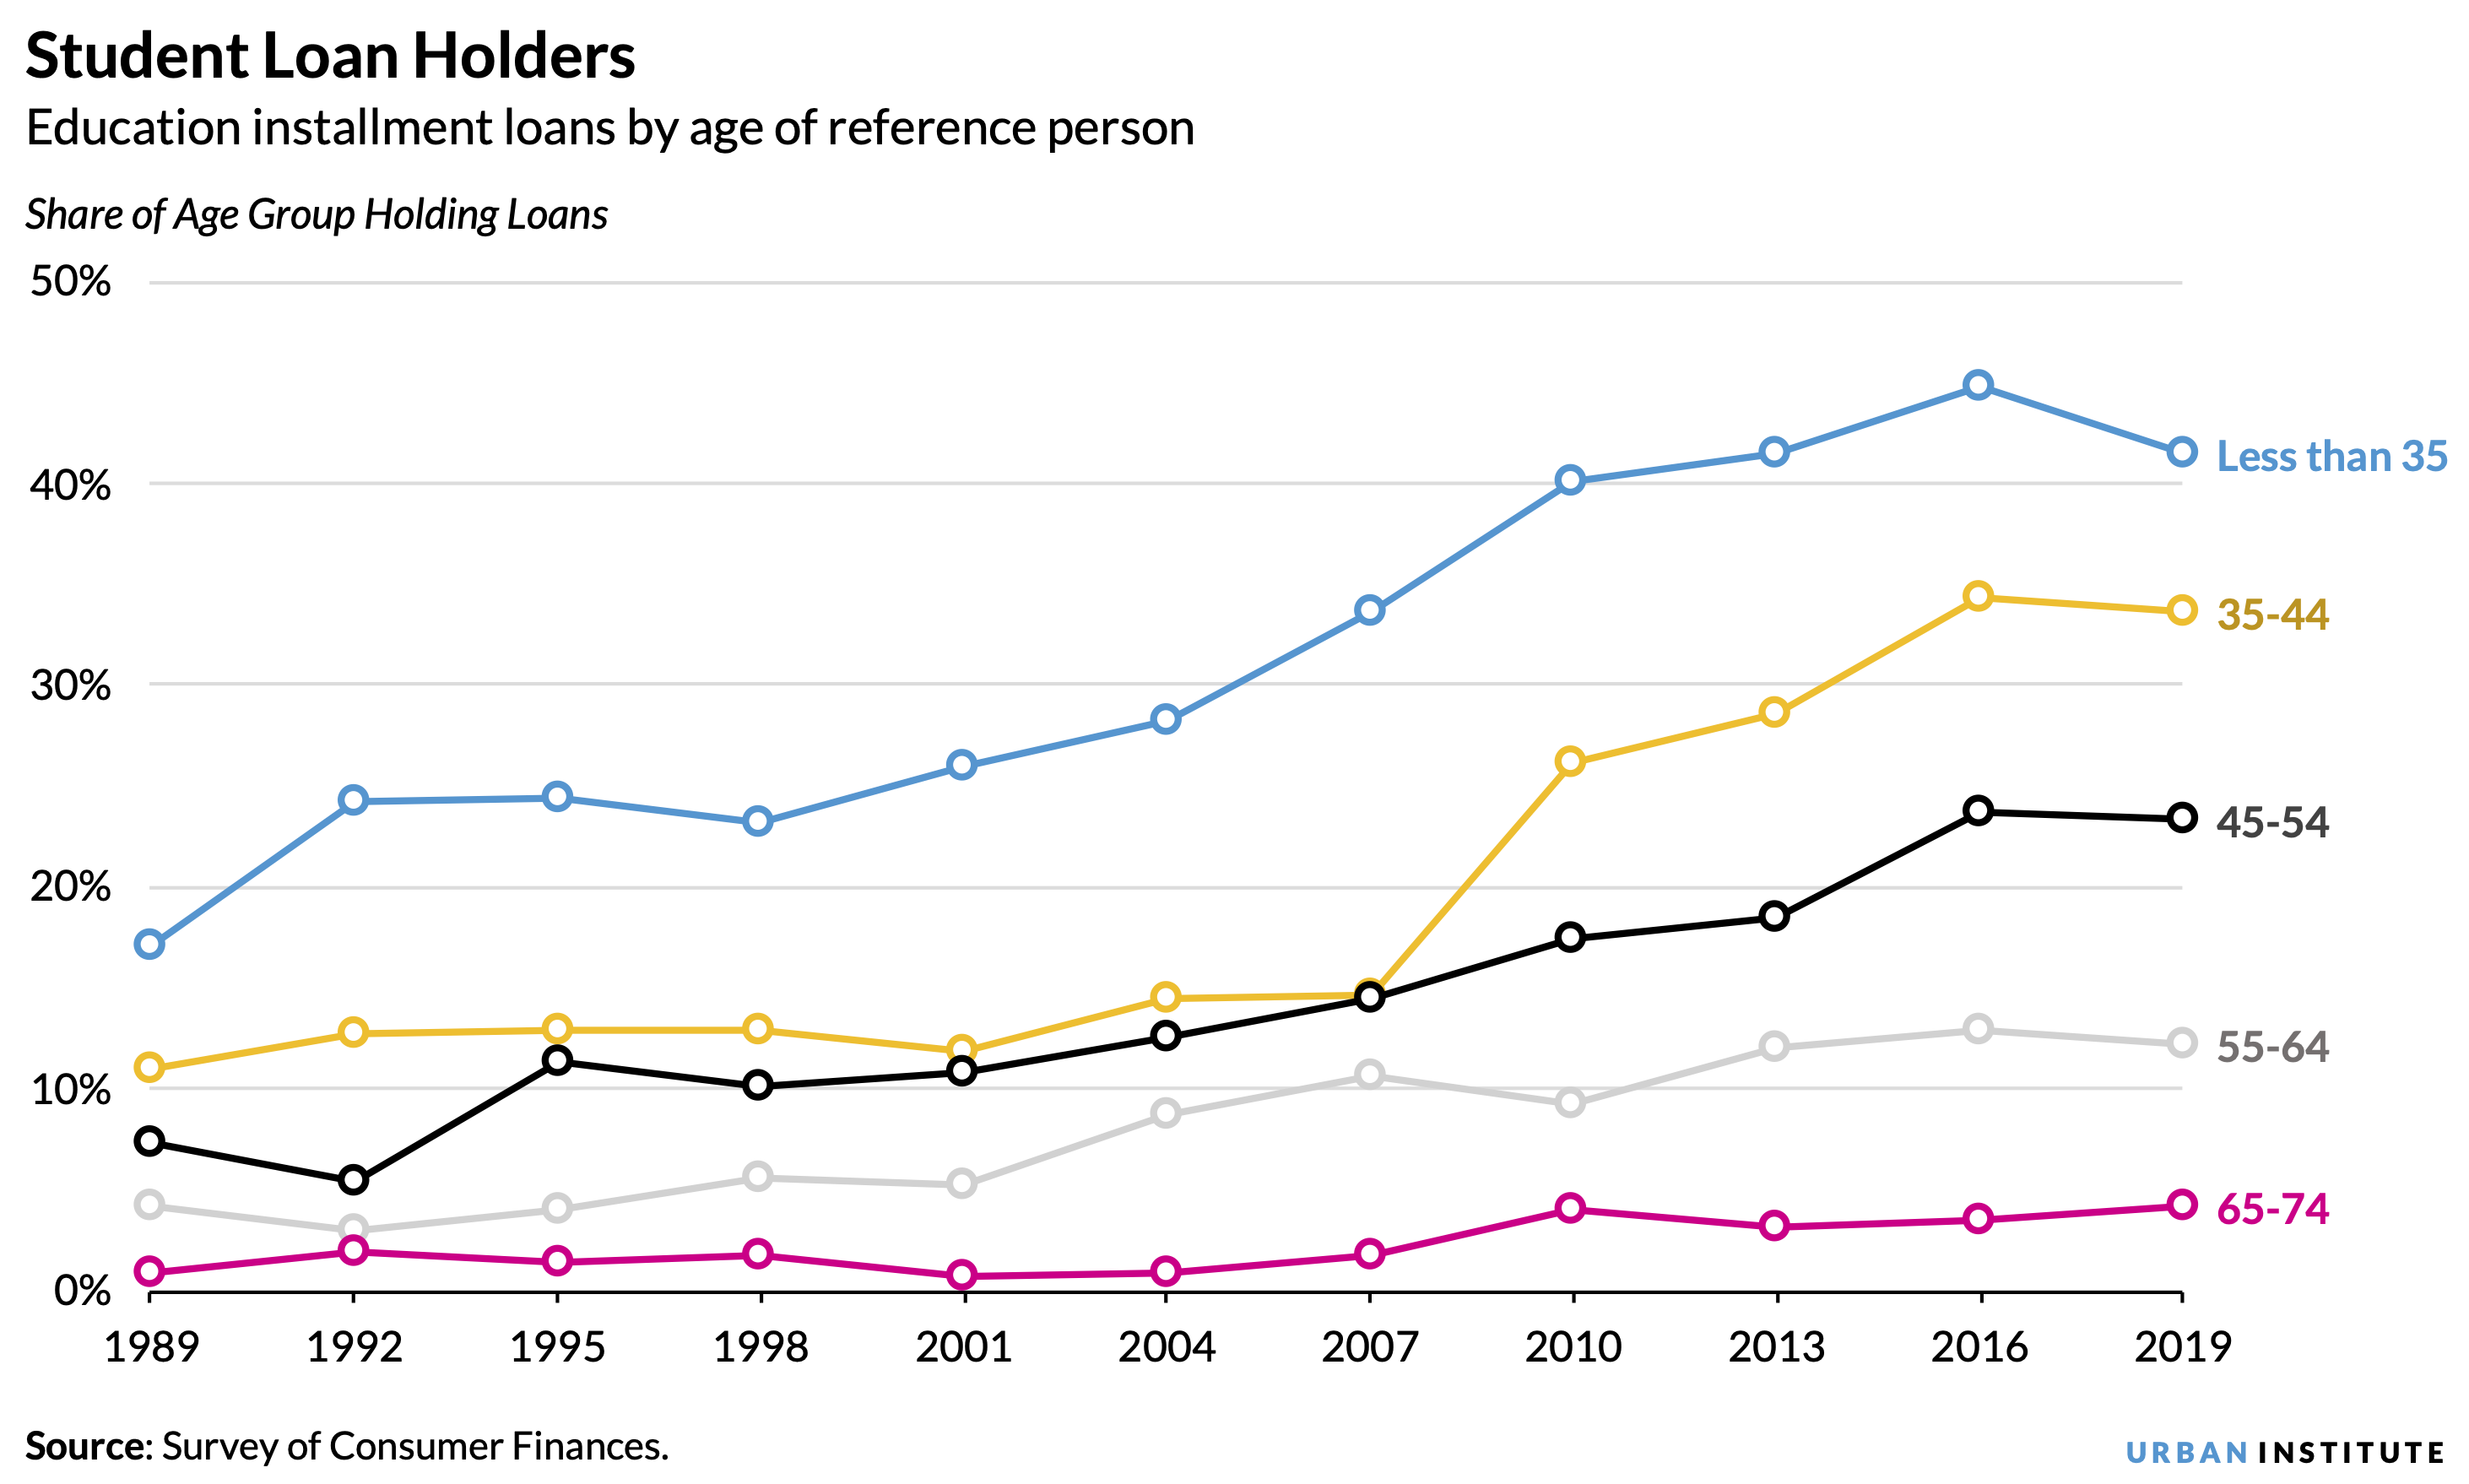 A line chartshowing the number of student loan holders from 1989 to 2019, broken down by age group.